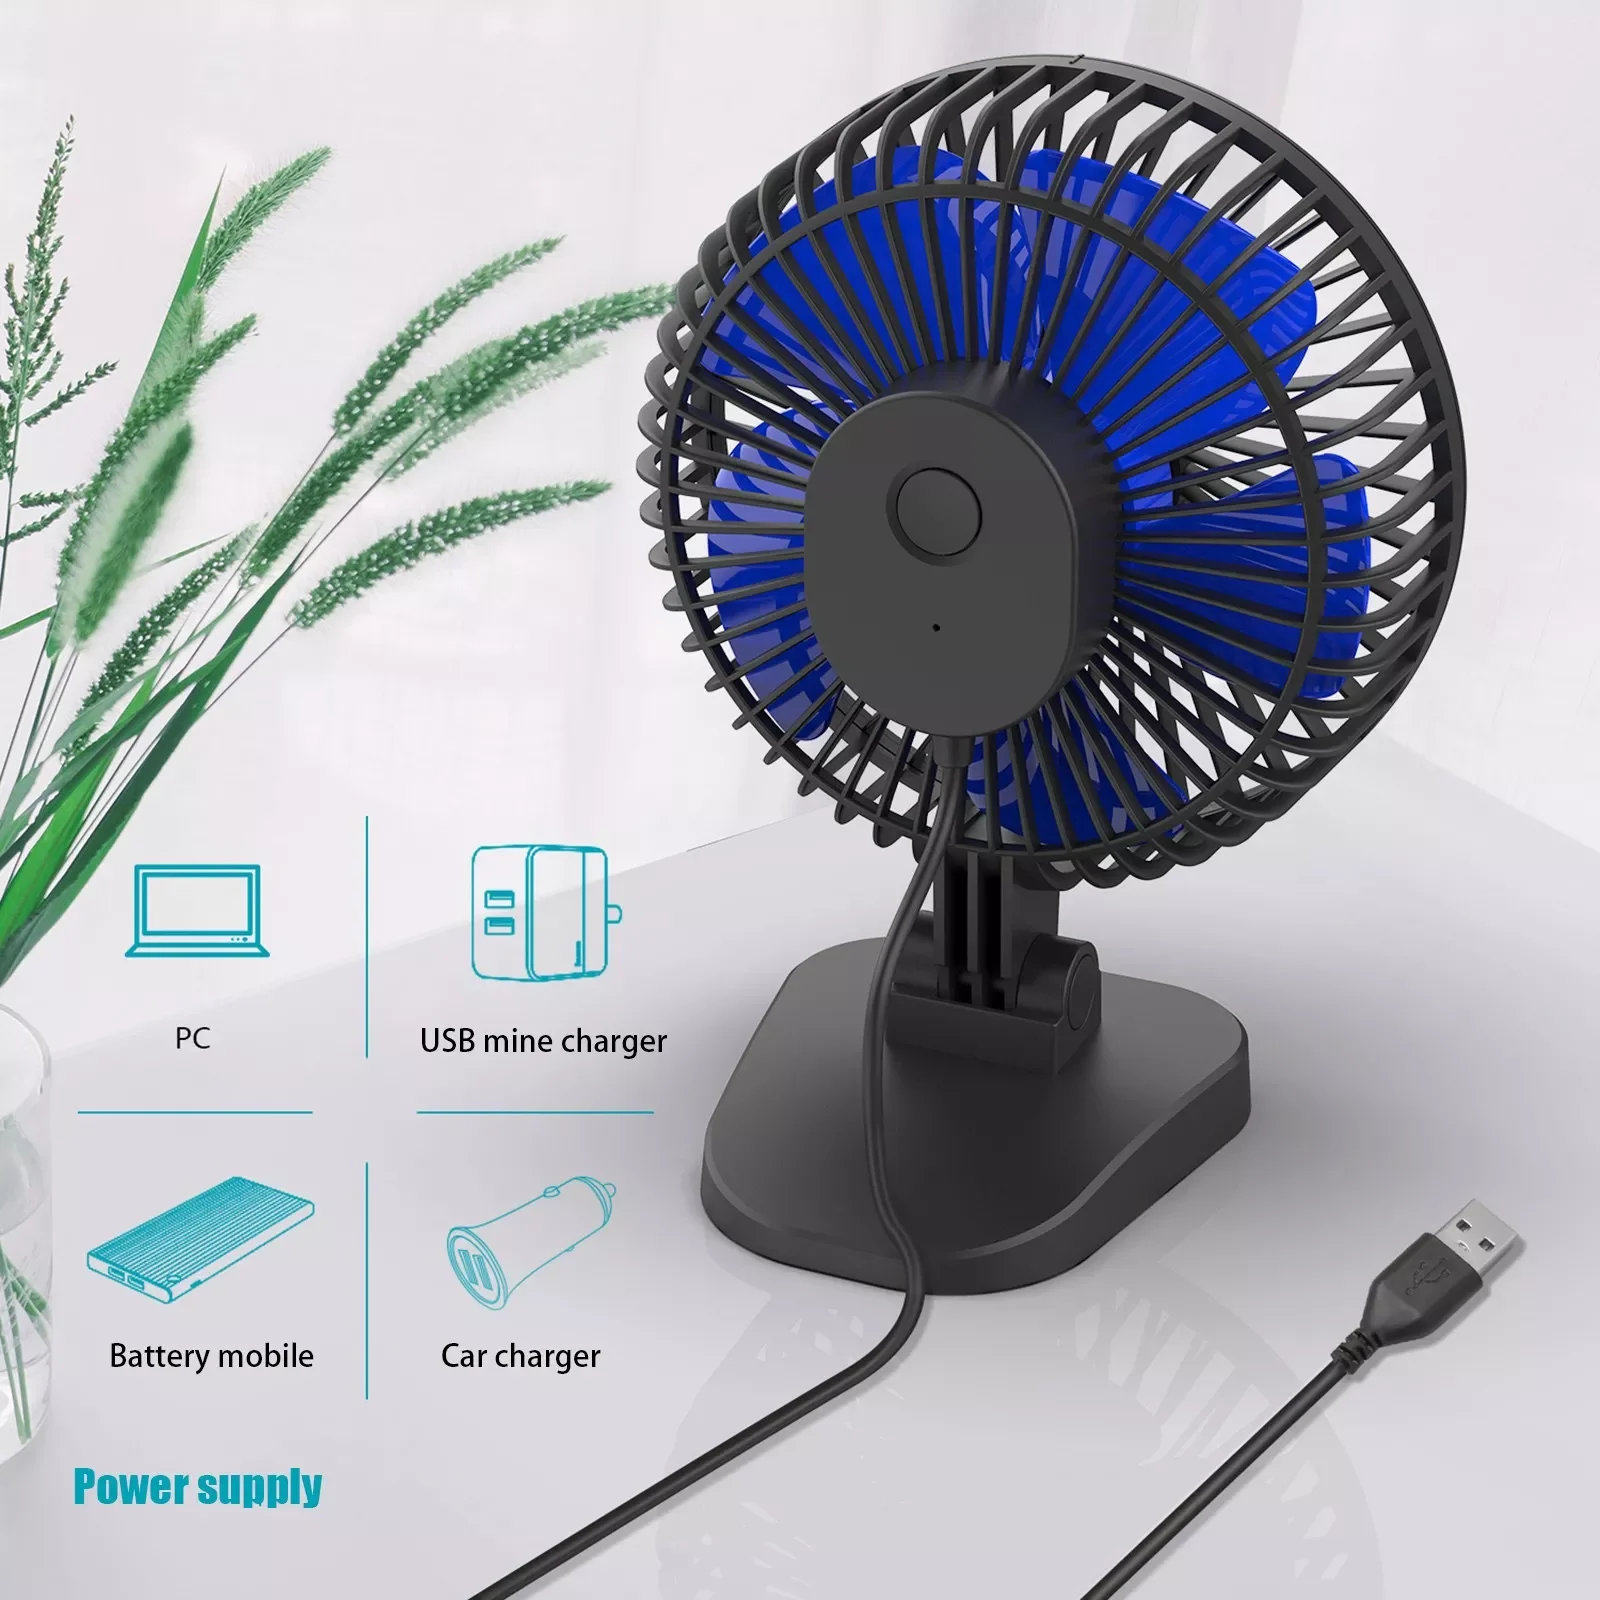 Mini Usb Desk Fan Better Cooling Perfect,strong Airflow Whisper Quiet Portable Fan For Desktop Office Table 4.9 Ft Cord#G4